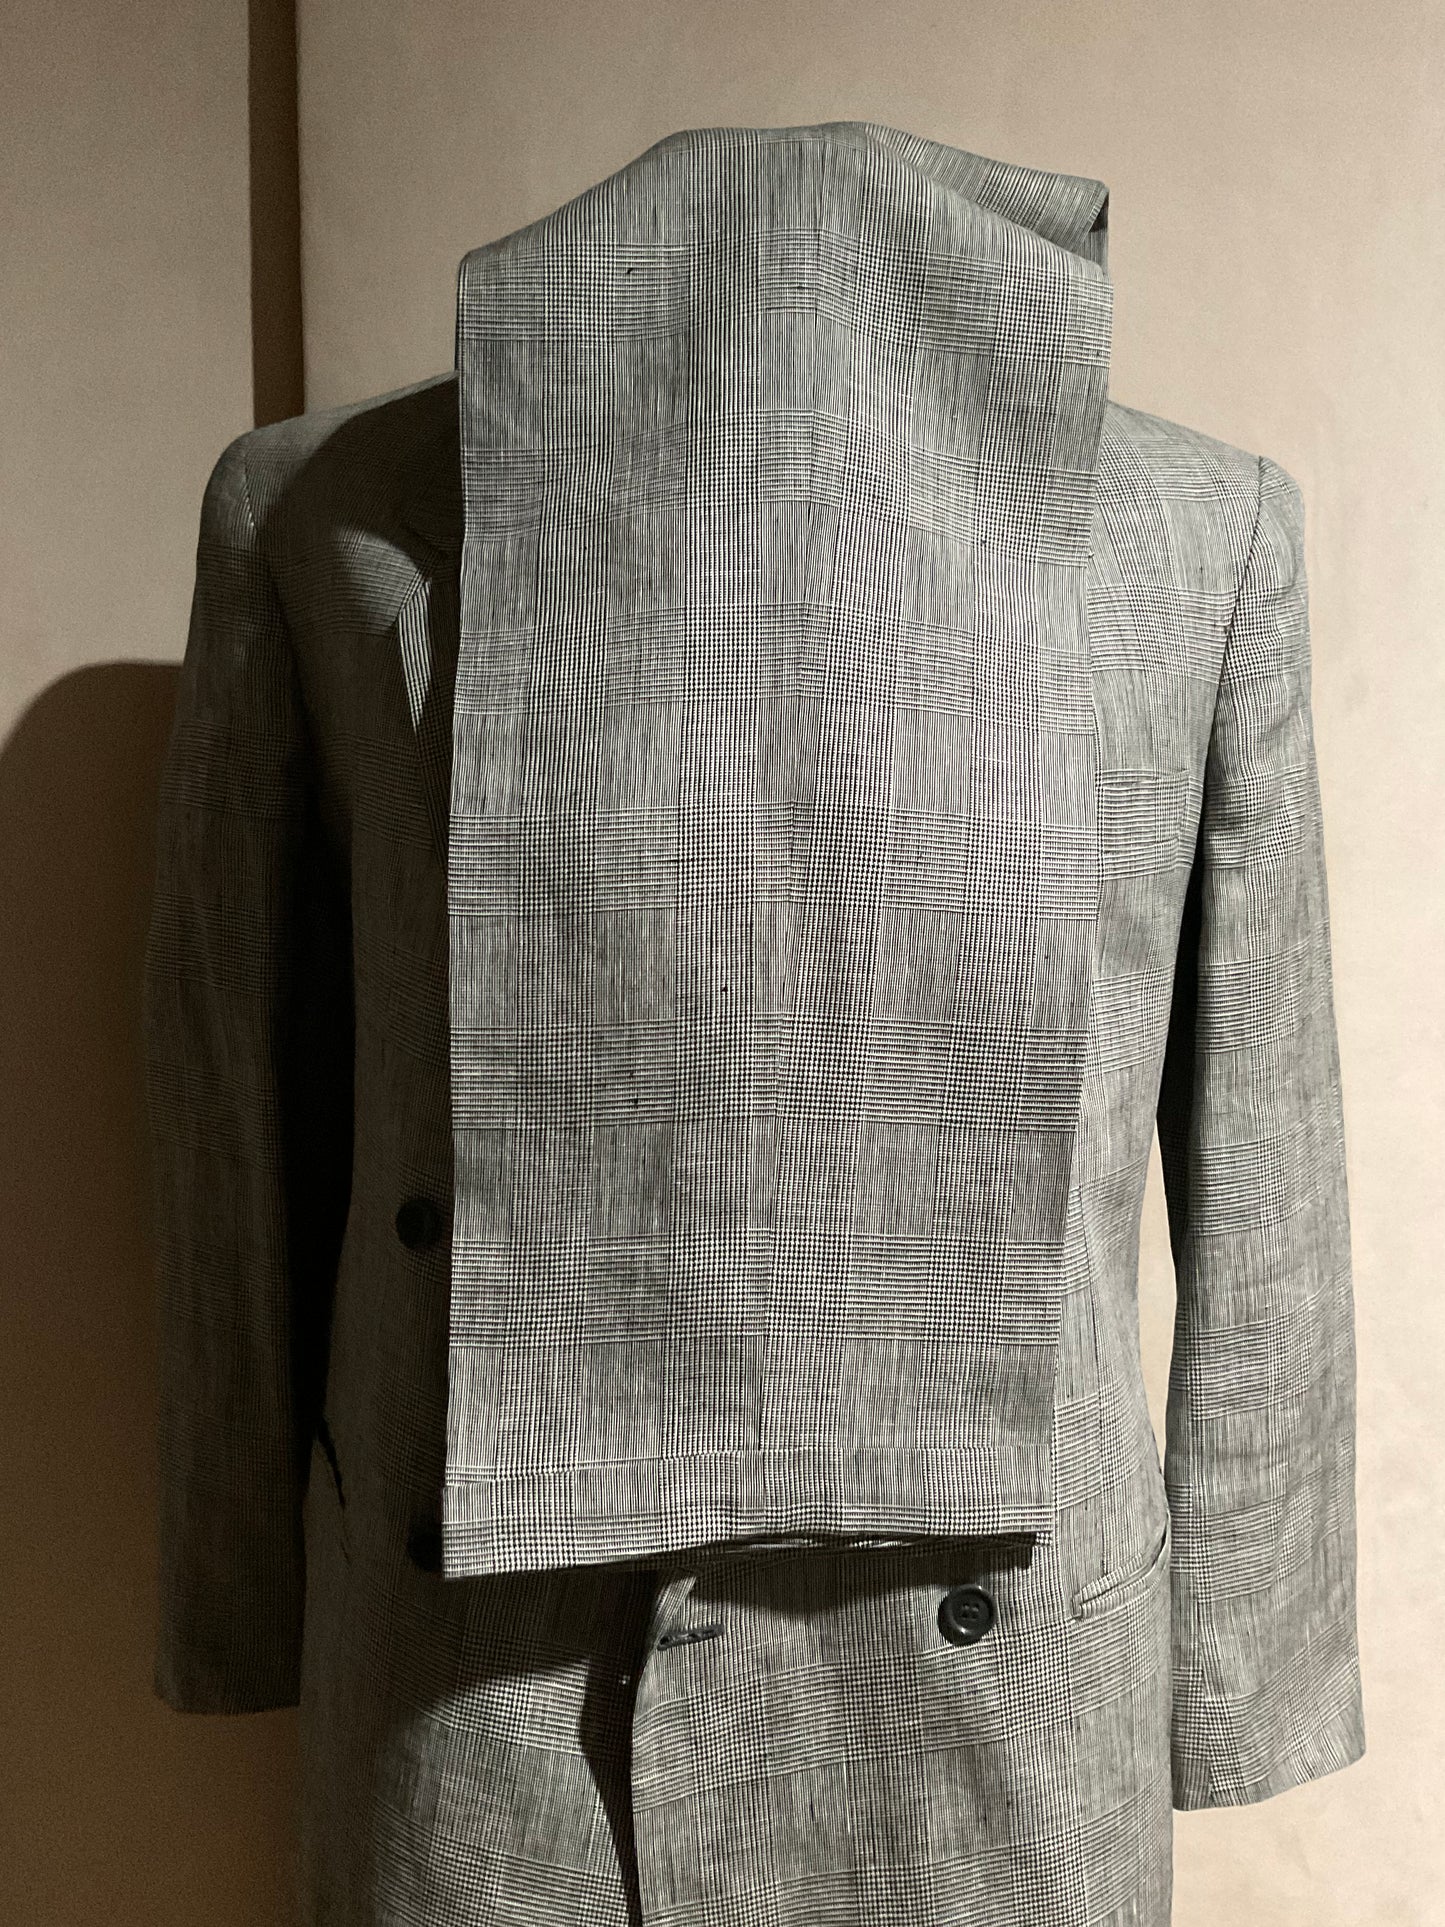 R P SUIT / BLACK & WHITE GLEN PLAID LINEN / DOUBLE BREASTED / 38 REG / MADE IN ITALY